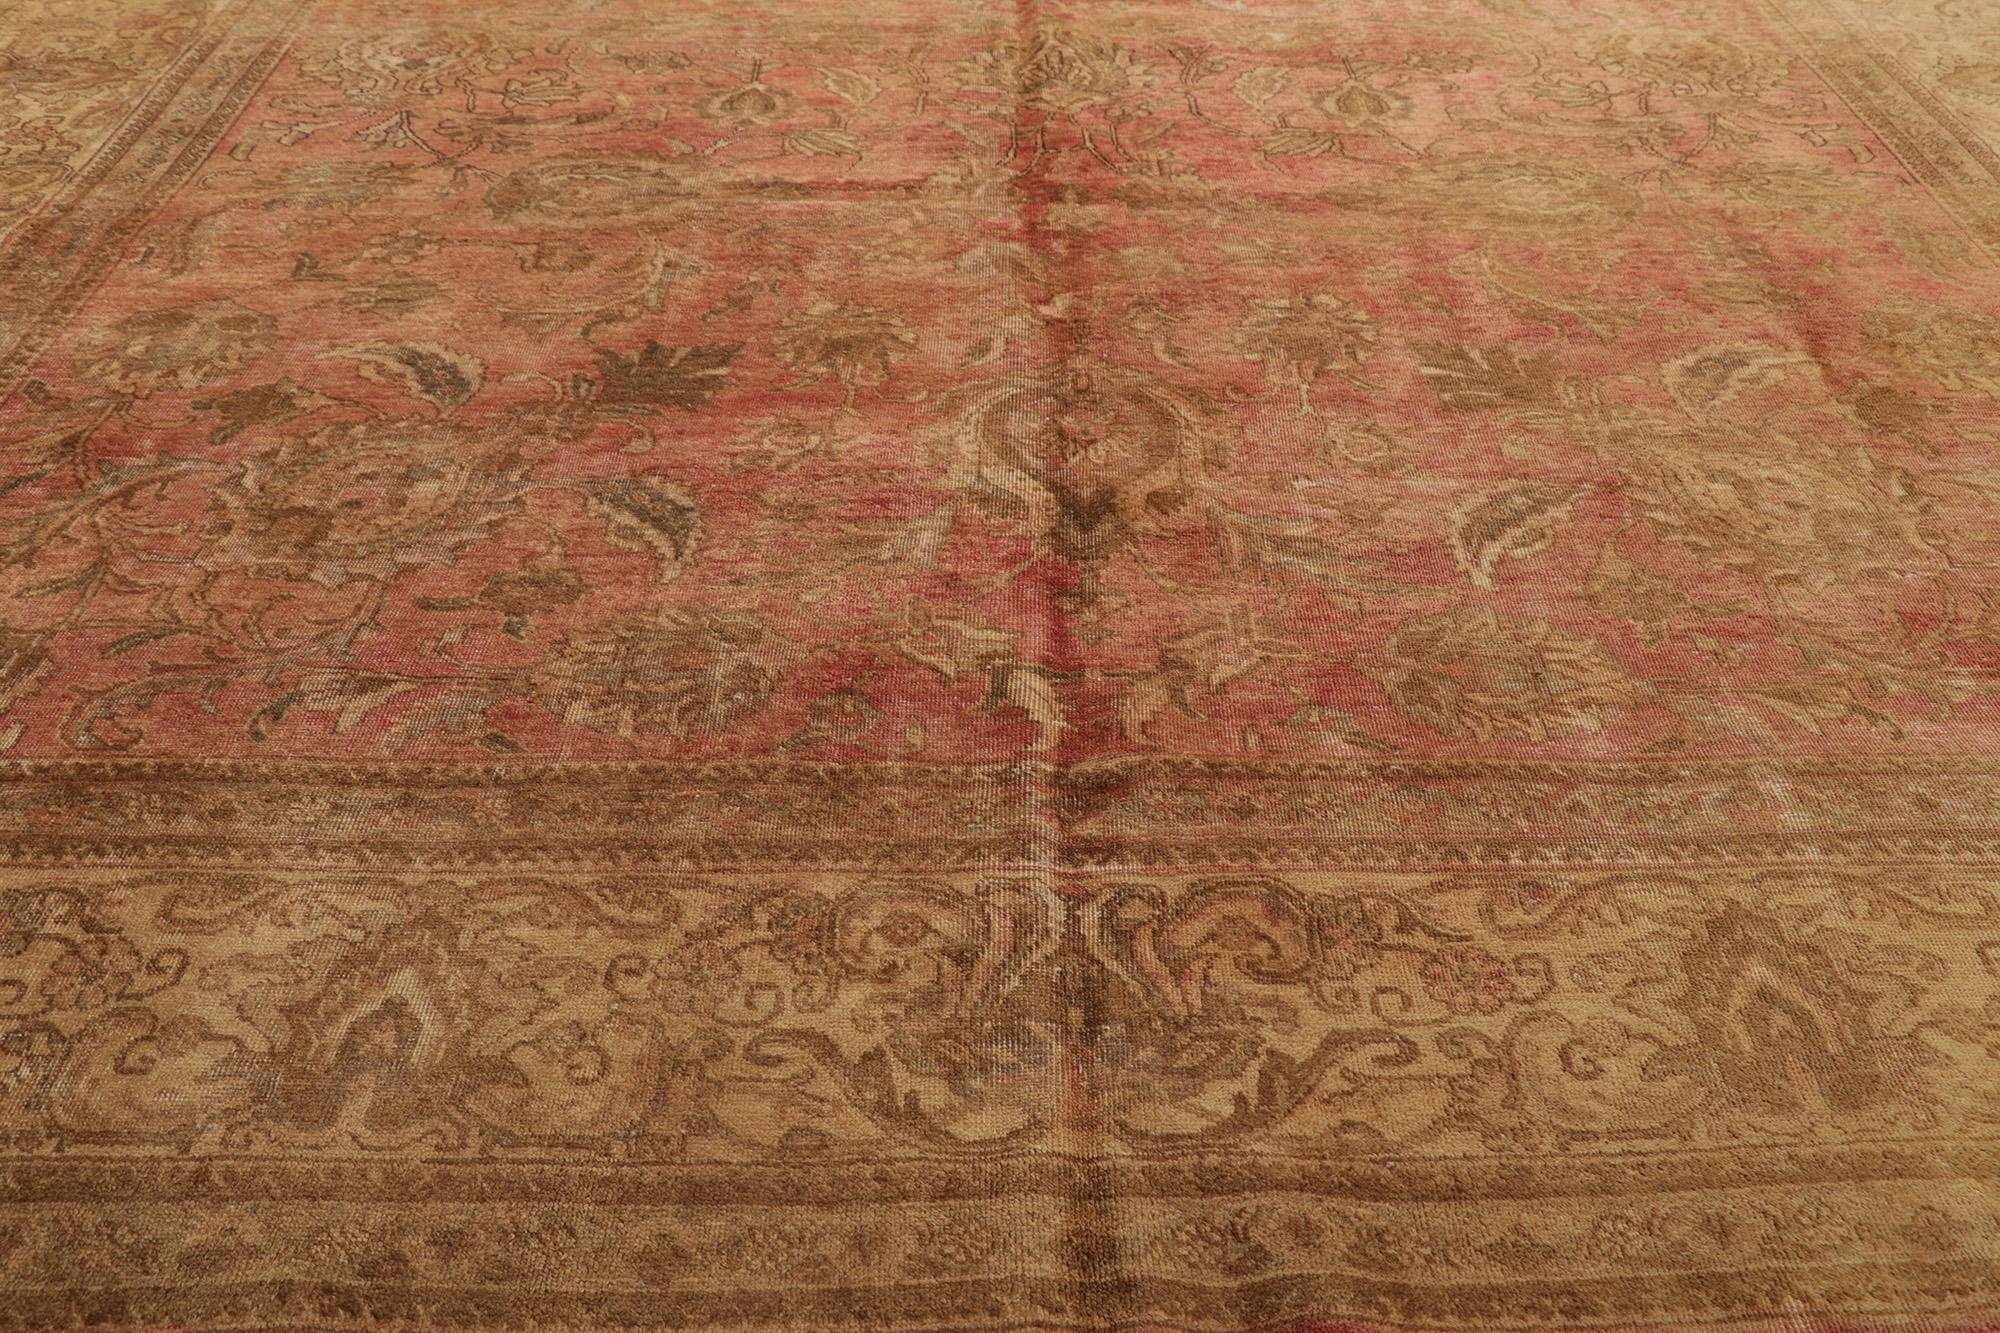 Hand-Knotted Distressed Antique Persian Tabriz Rug with Rustic English Cottage Style